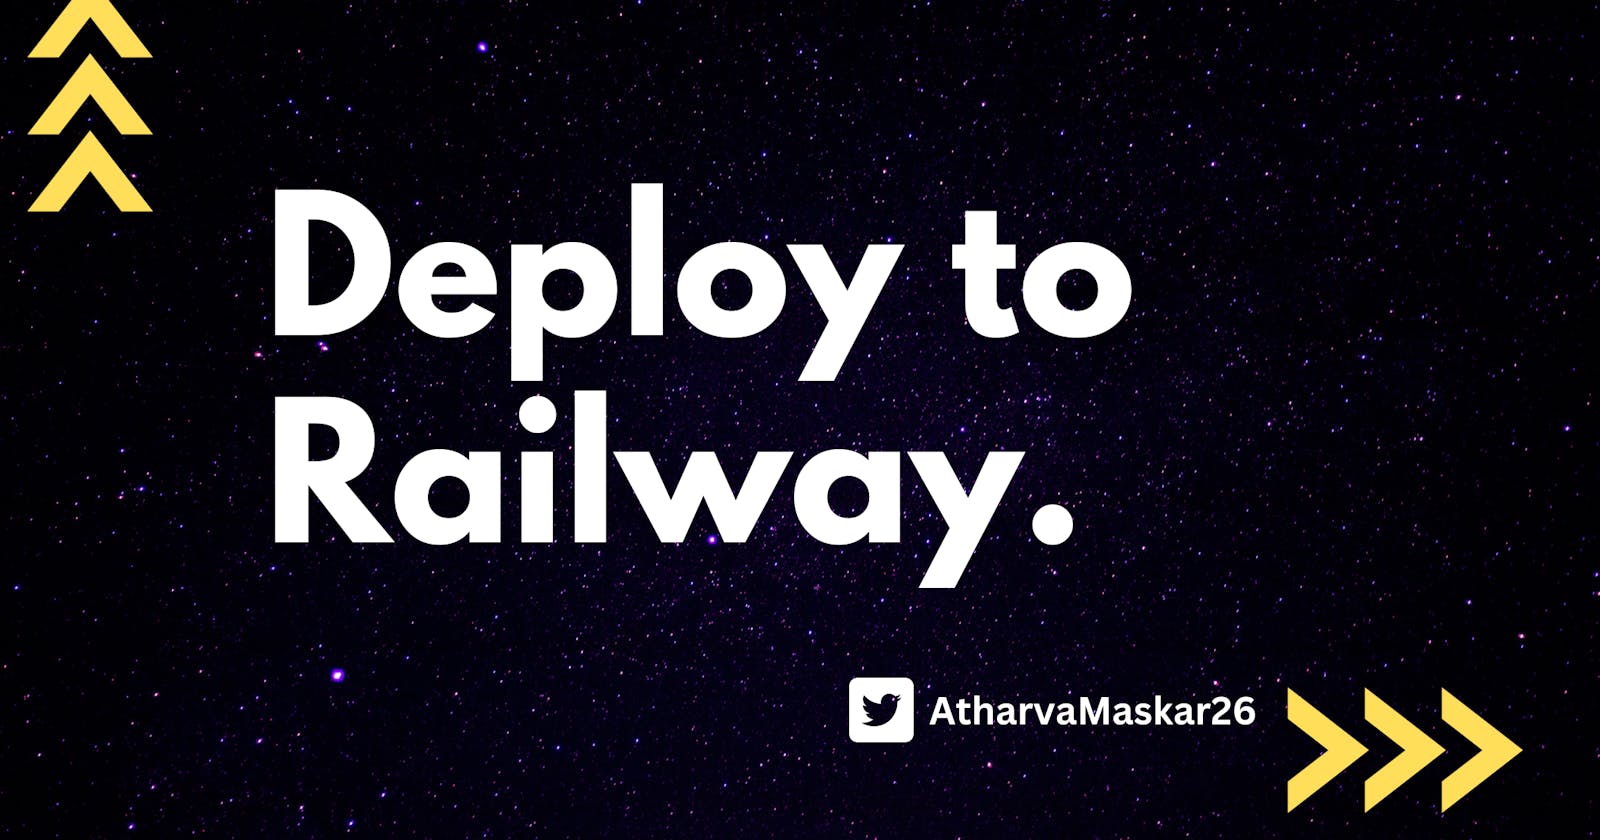 Why should you consider migrating your Application to Railway?